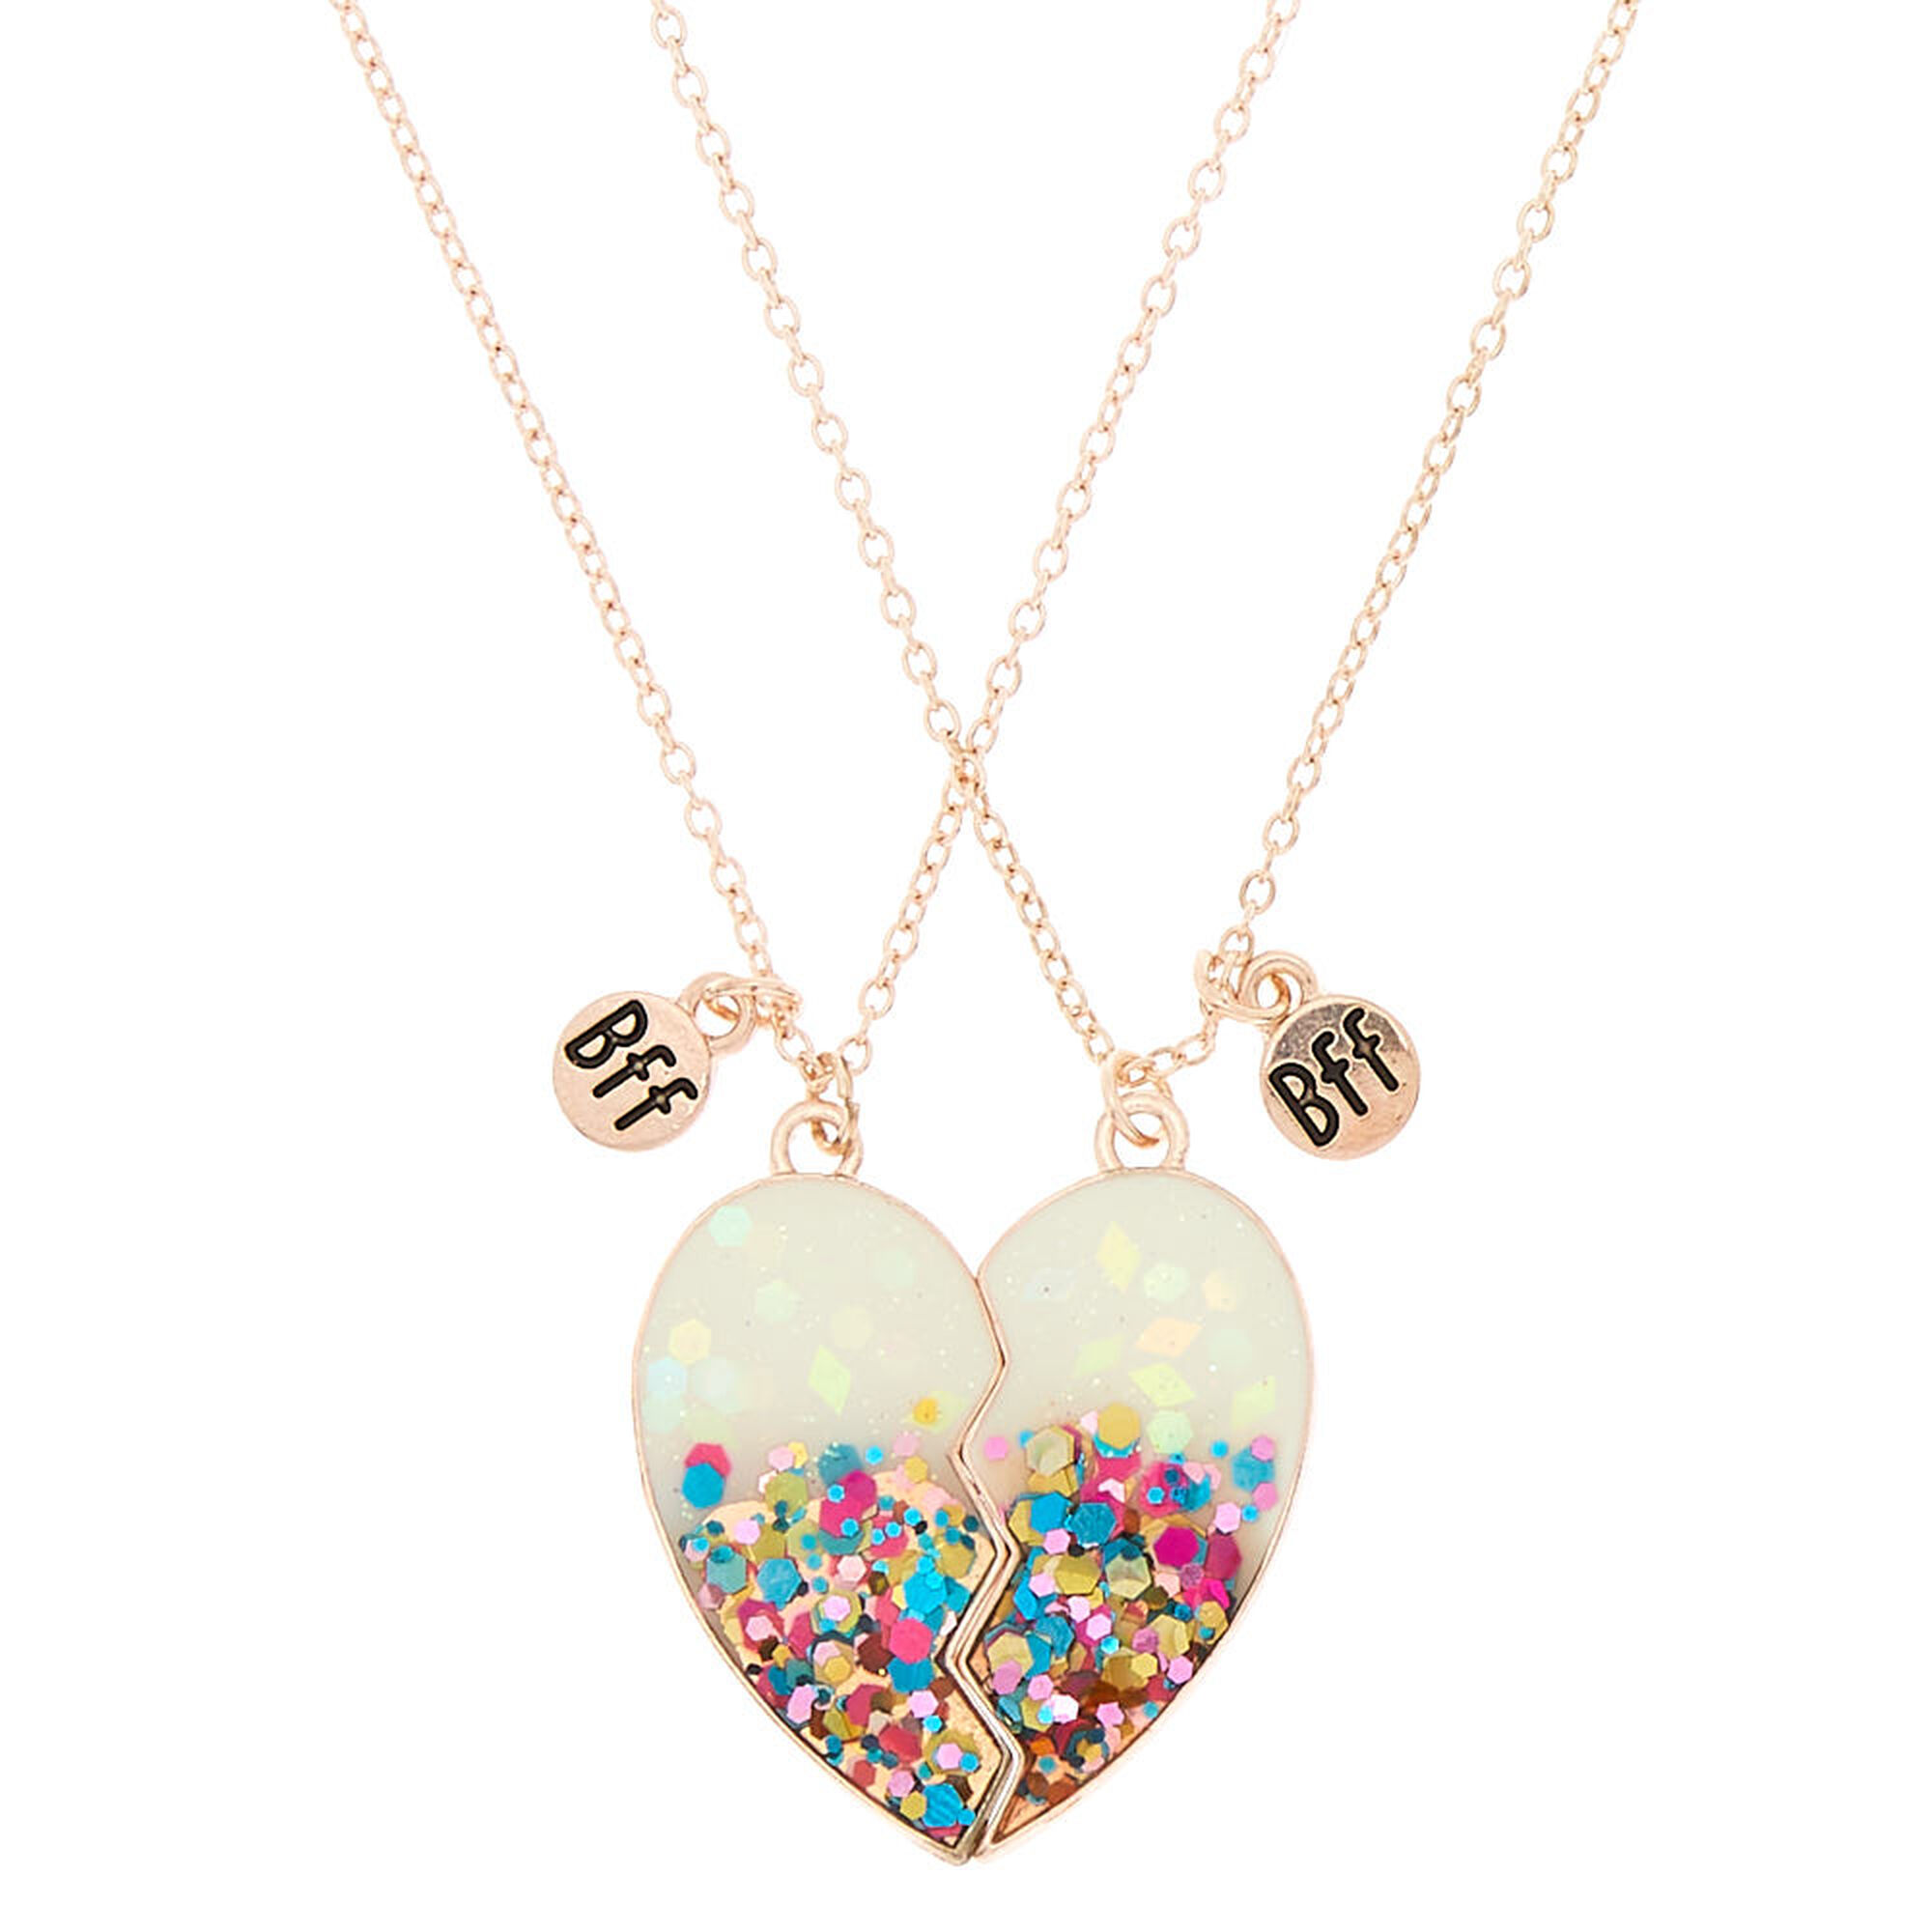 Best Friends Confetti Dipped Heart Pendant Necklaces - White, 2 Pack ...